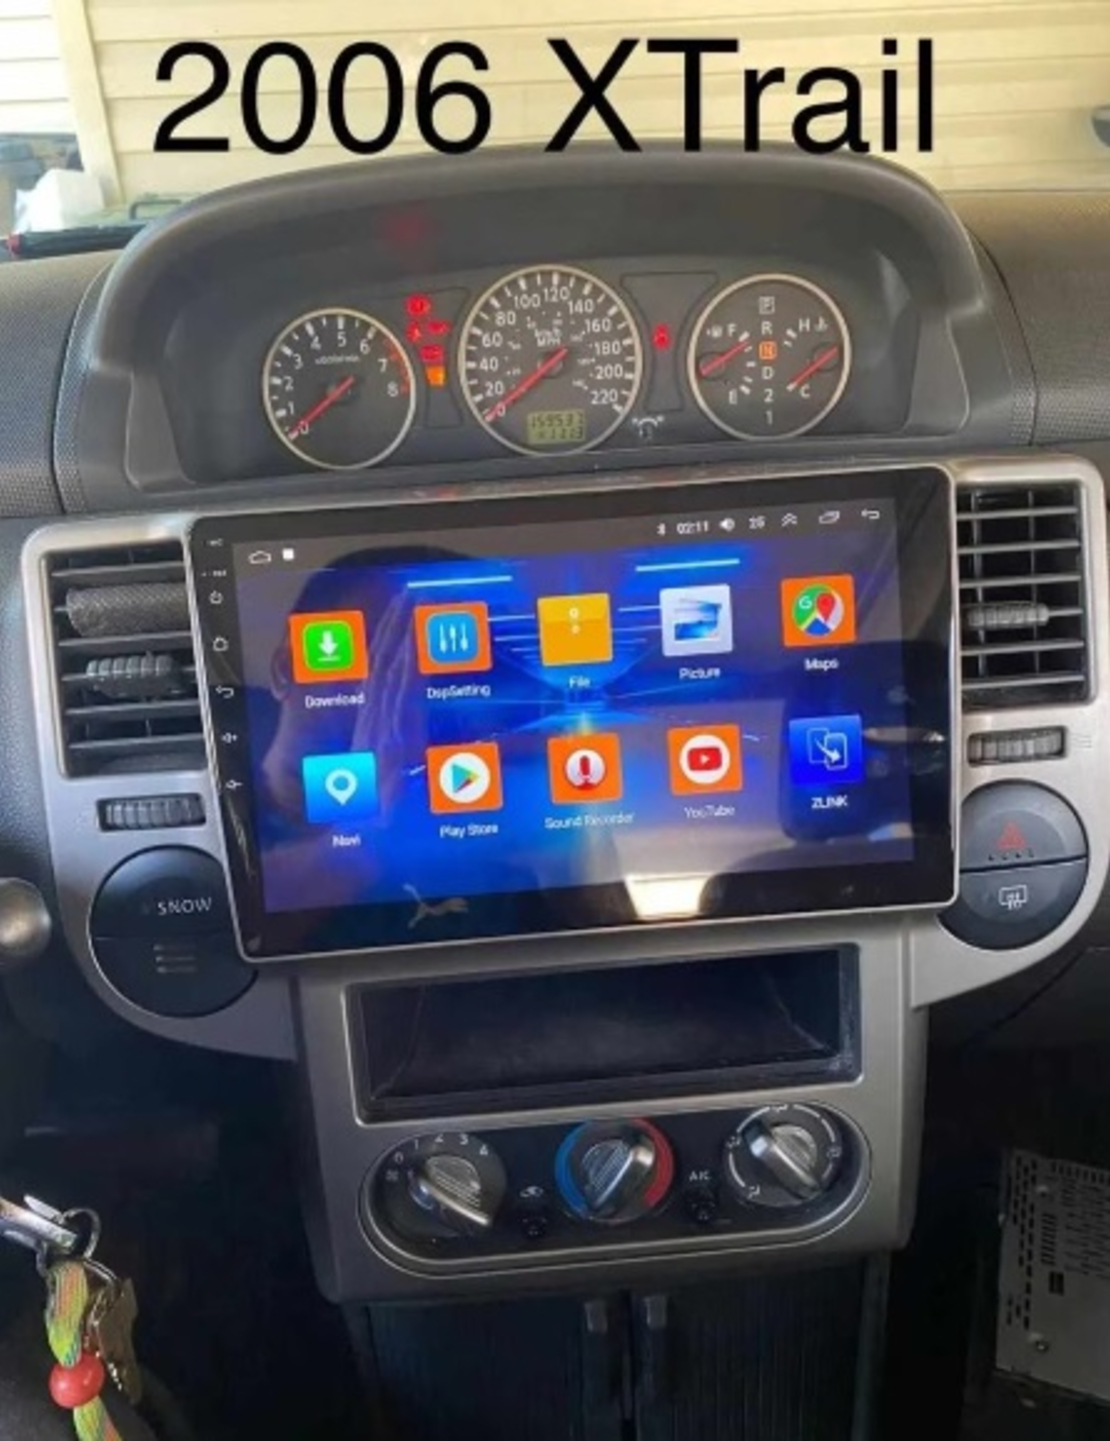 Nissan Xtrail T30 2002 -2006, Android Multimedia/Navigation